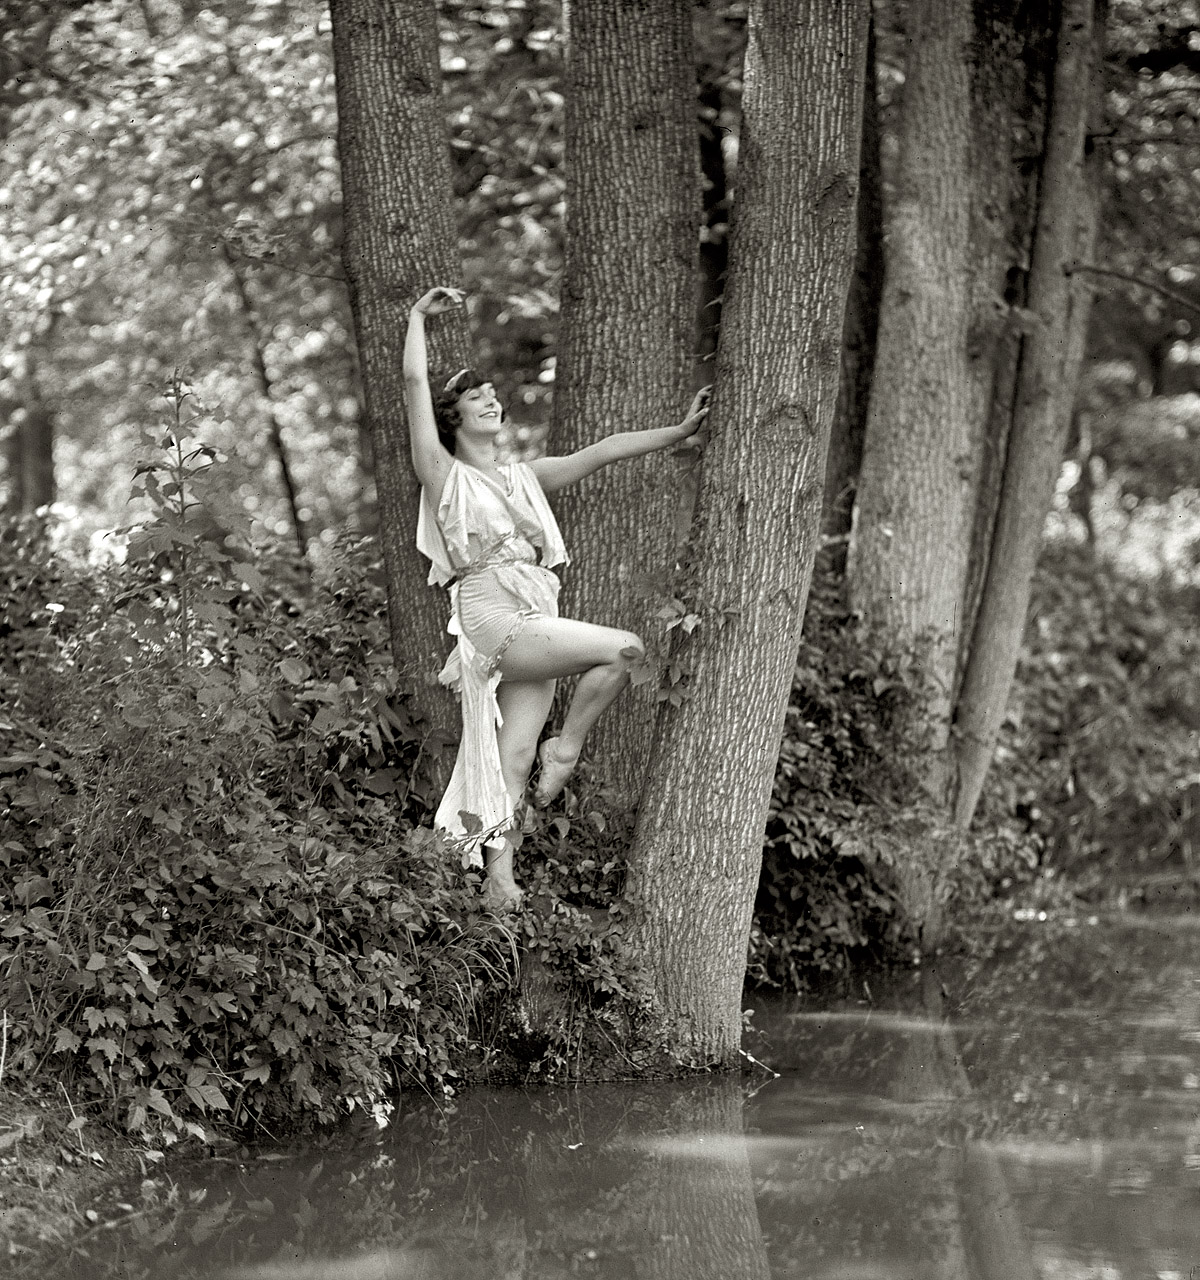 June 30, 1925. "Miss Dorothy Brautigam of the National American Ballet." National Photo Company Collection glass negative. View full size.